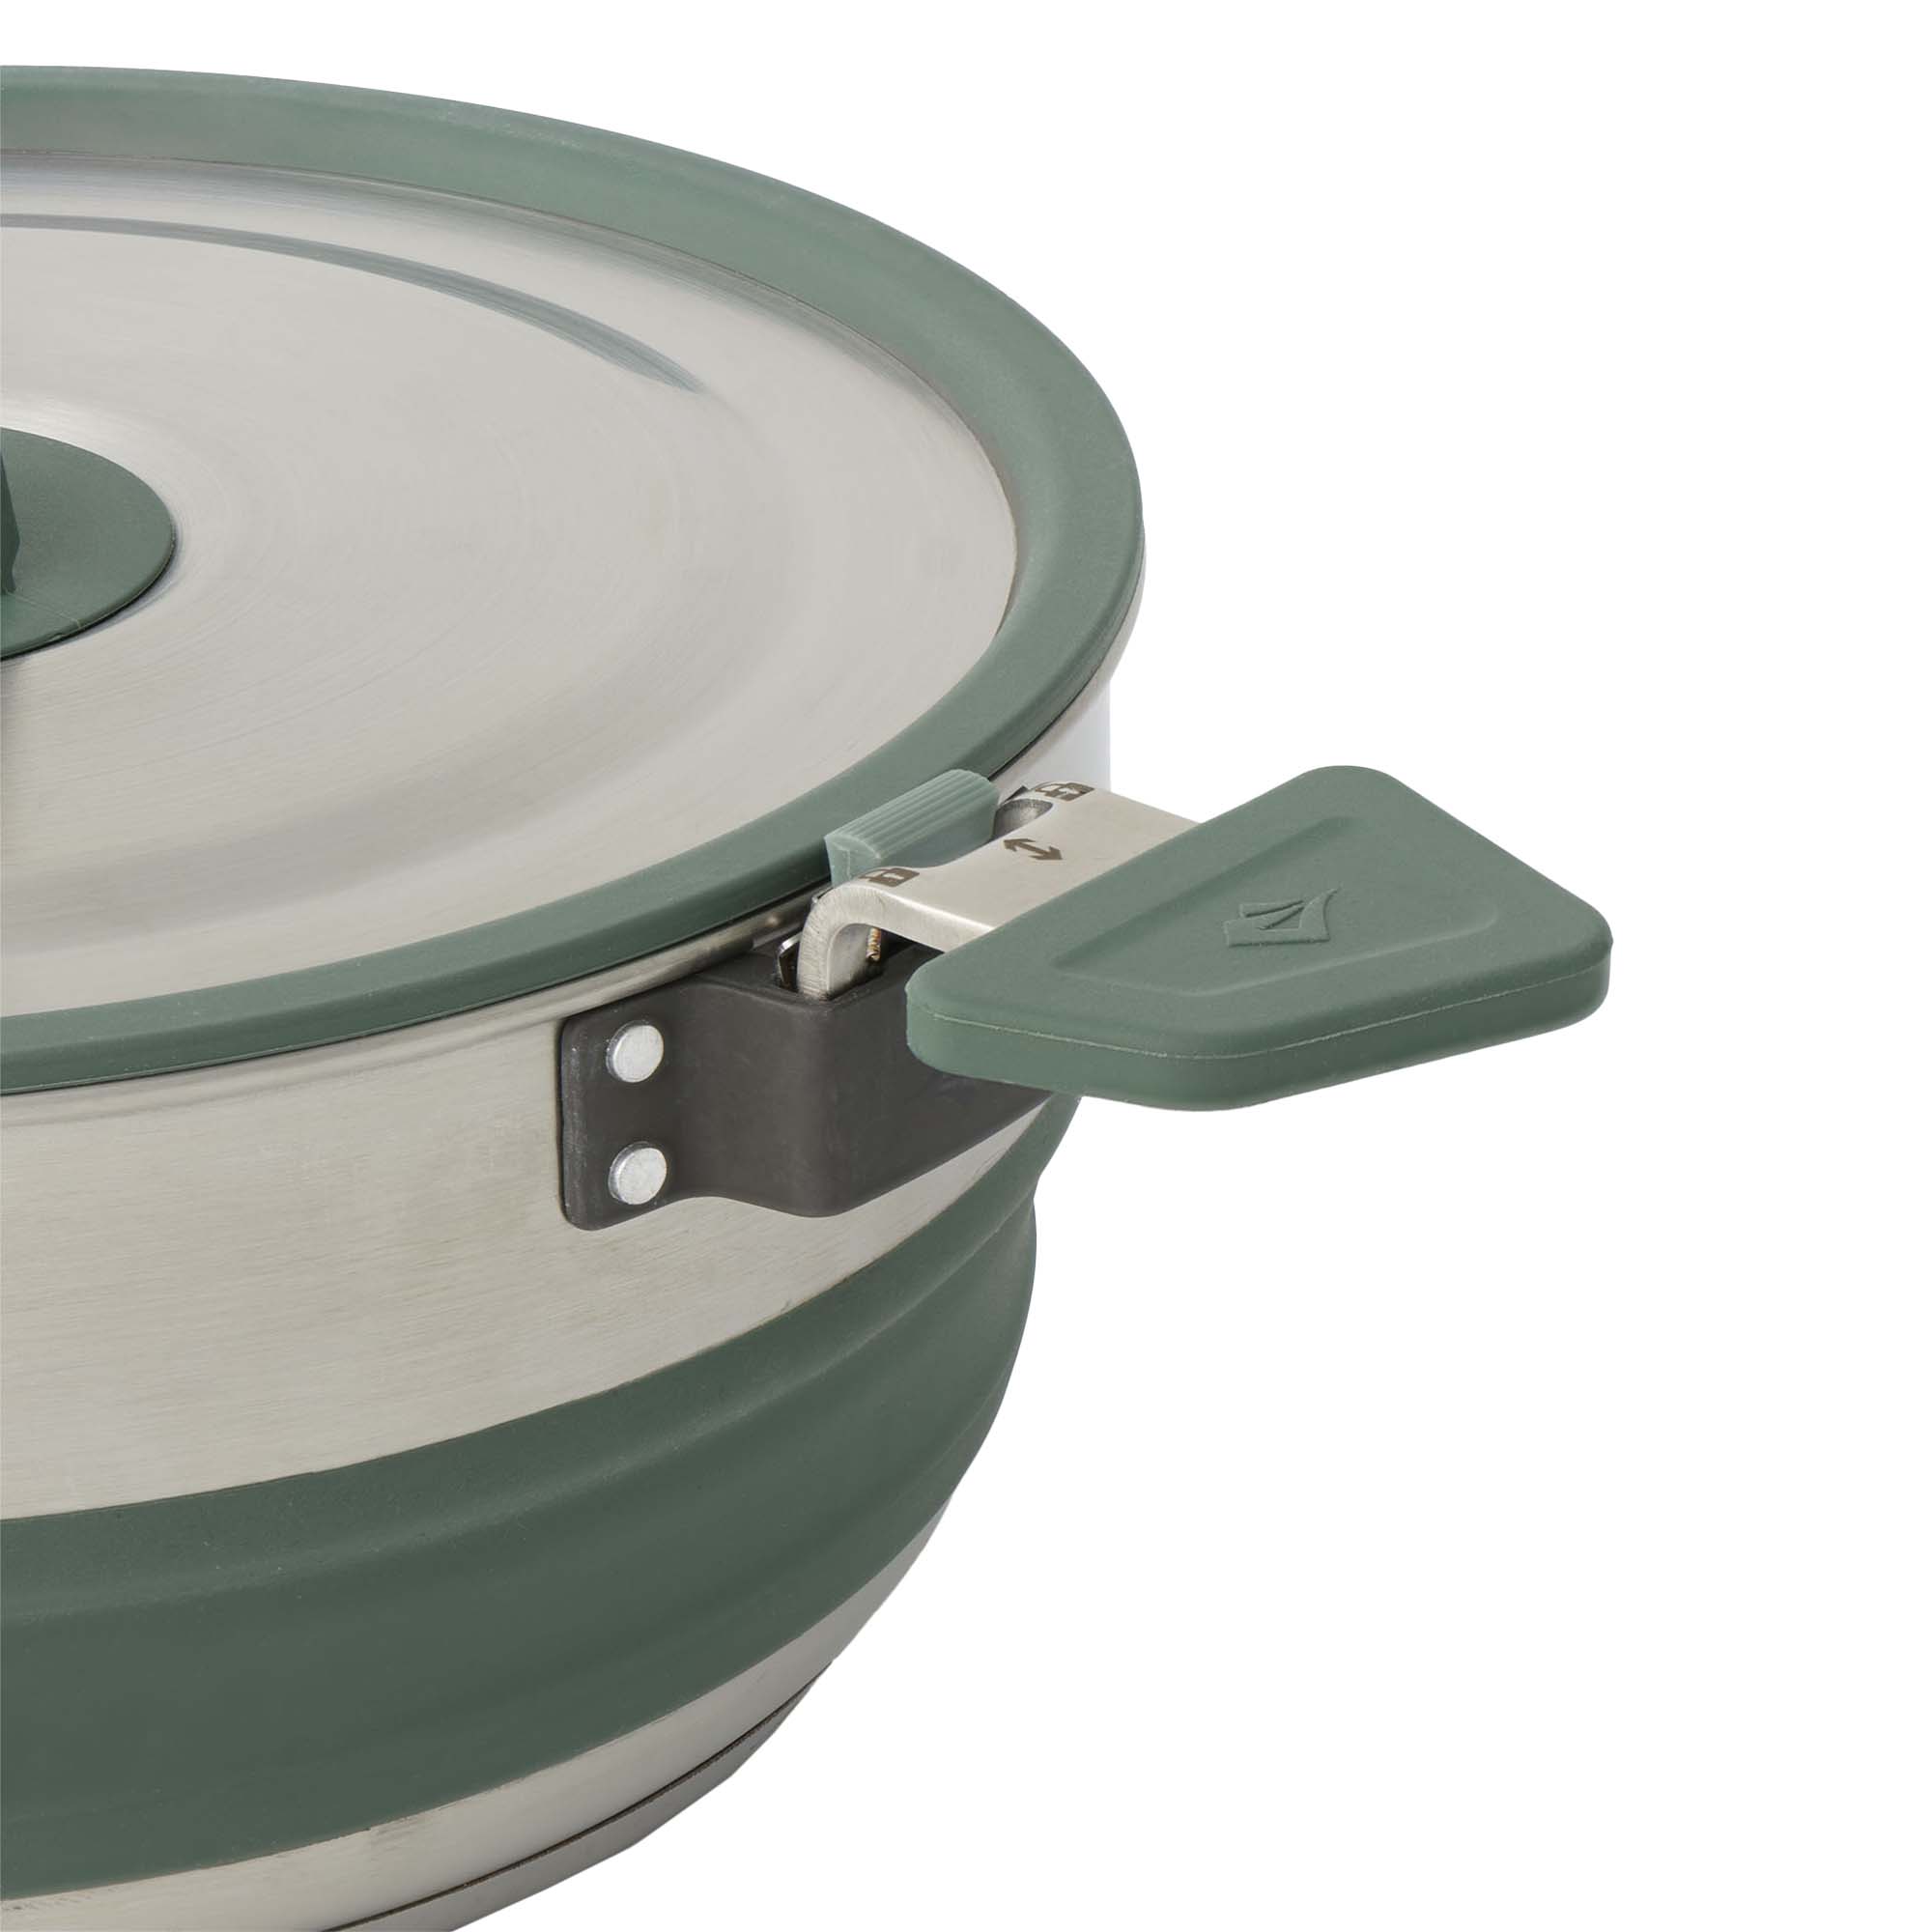 Sea to Summit Detour 3L Collapsible Cooking Pot